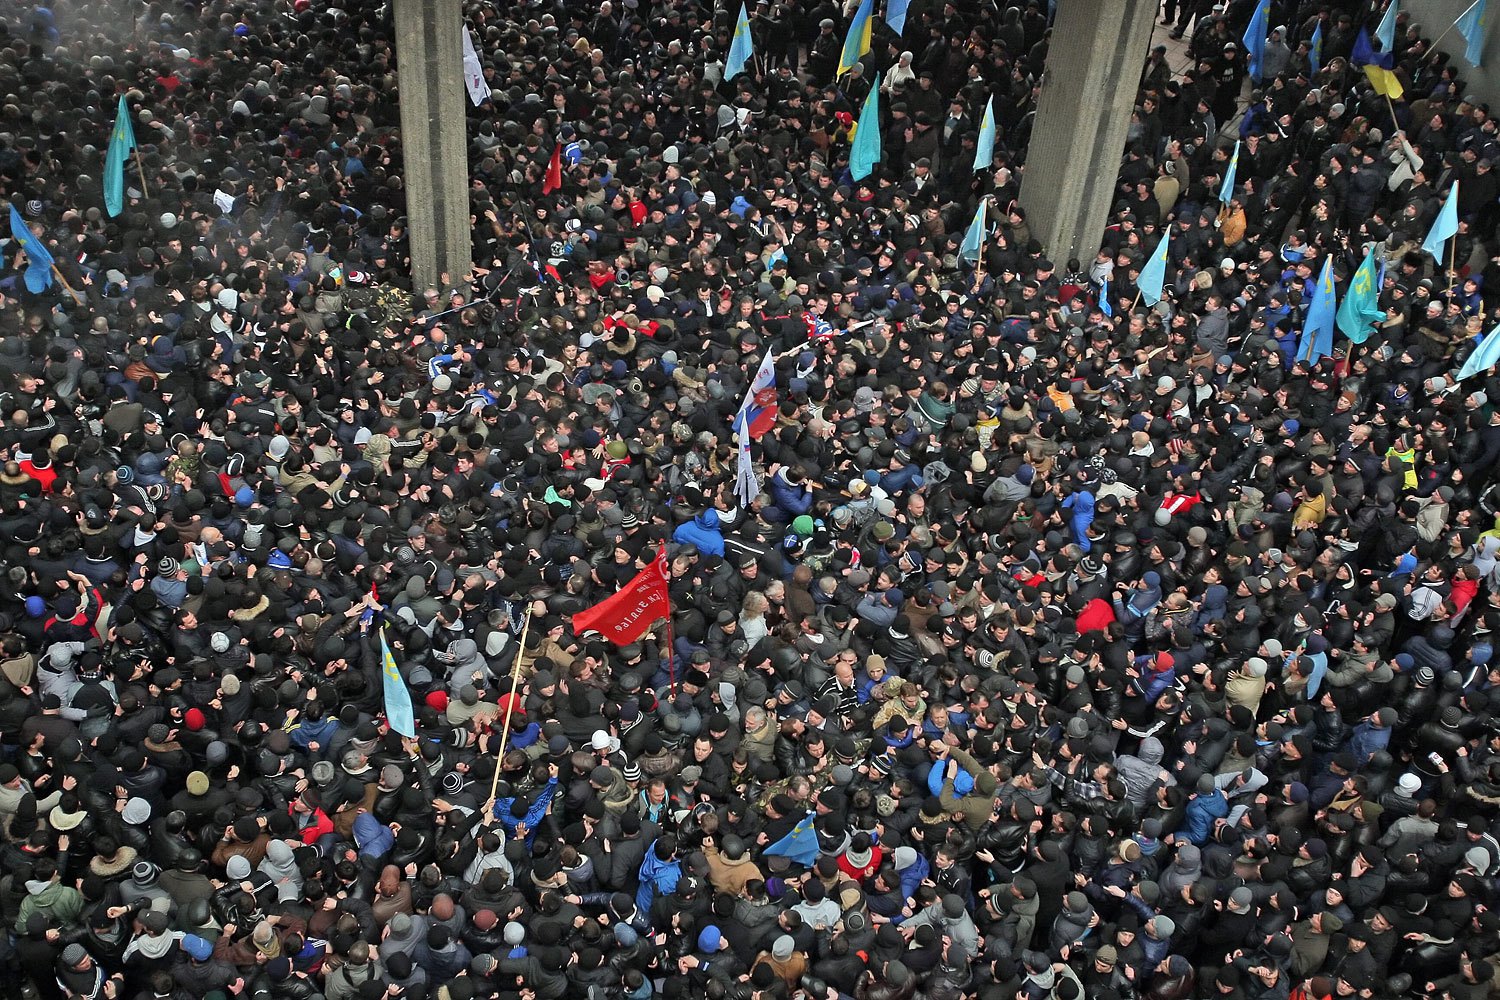 Ukrainian and Russian supporters clash during a protest near the Parliament building in Simferopol, Feb. 26, 2014.